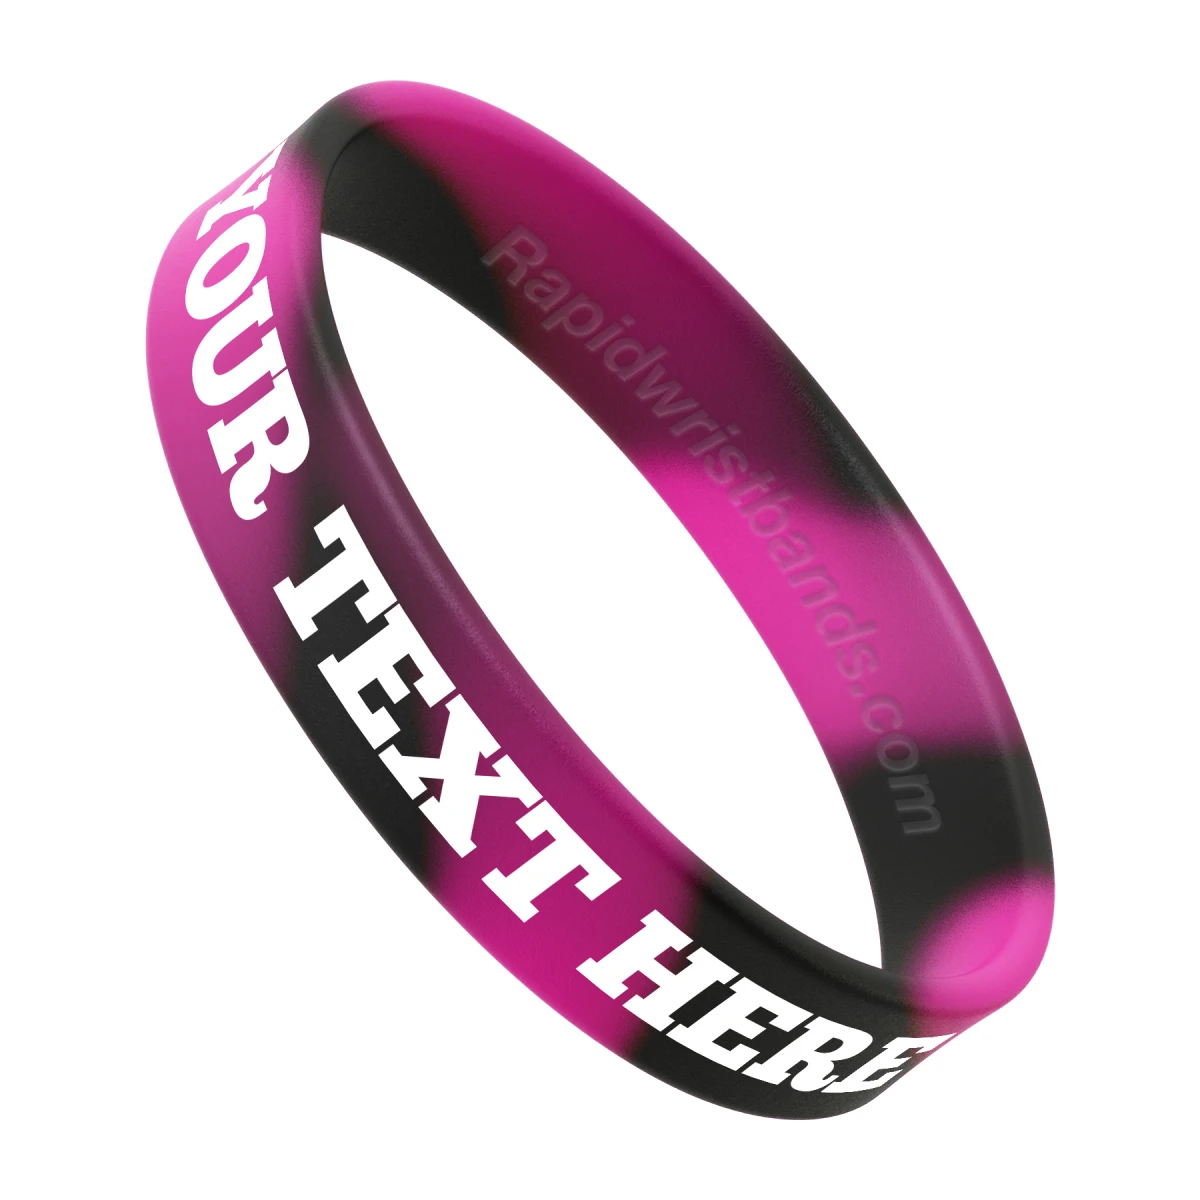 Swirl Black/Hot Pink Wristband With Your Text Here Printed In White